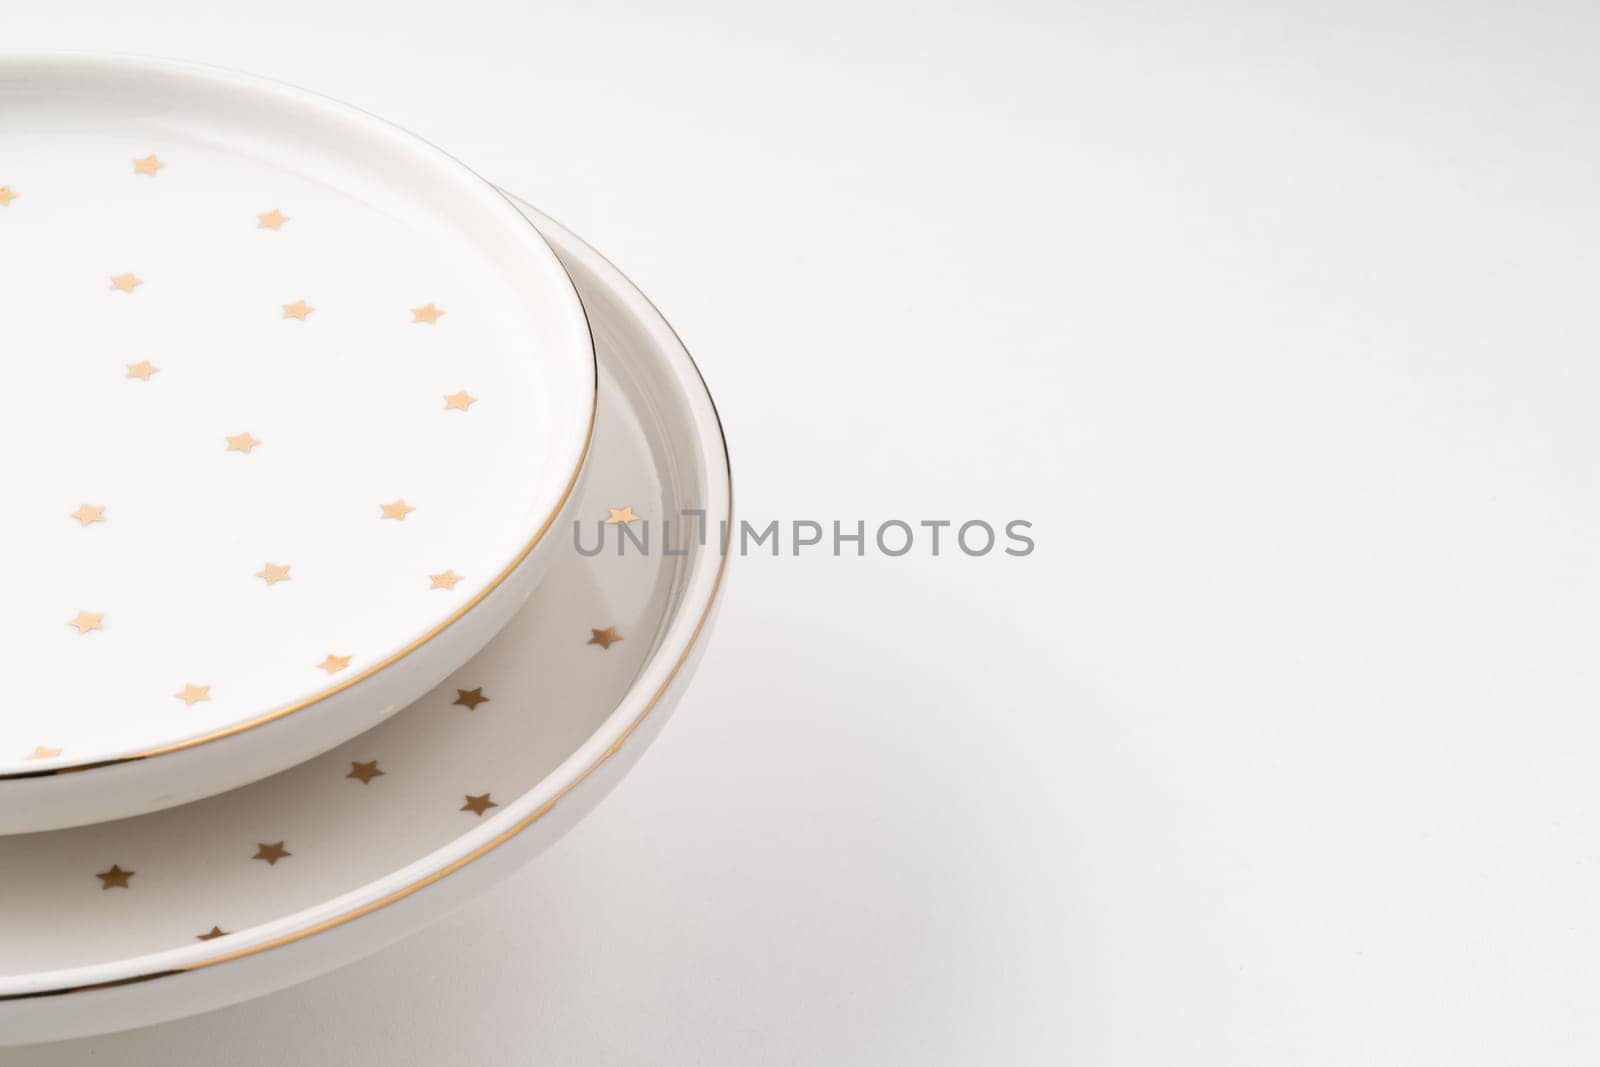 The ceramic plates isolated on white background by A_Karim